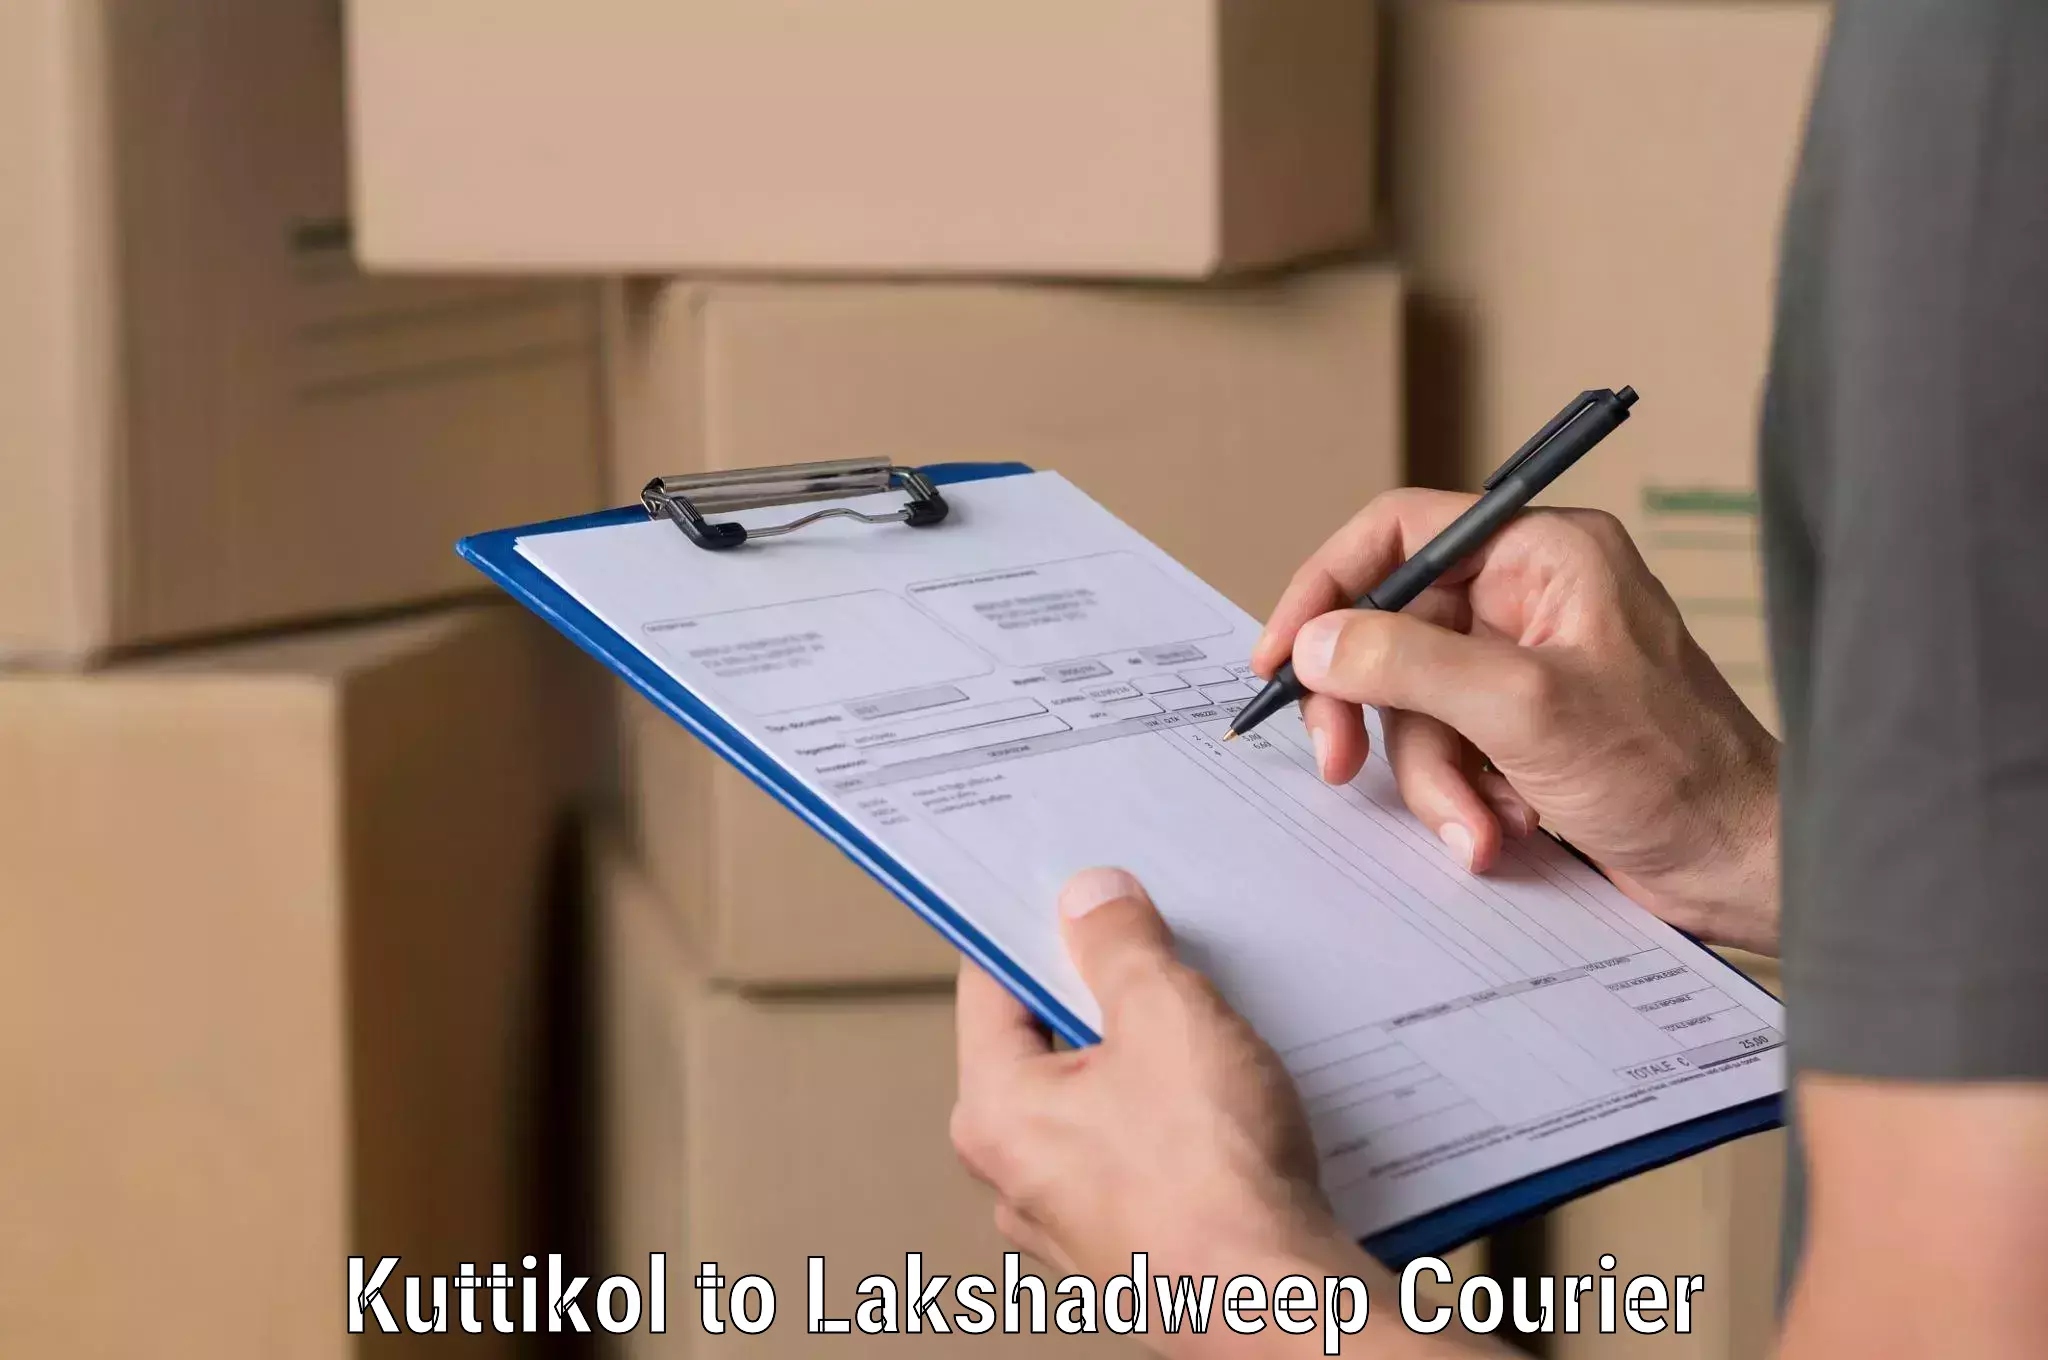 Large-scale shipping solutions Kuttikol to Lakshadweep